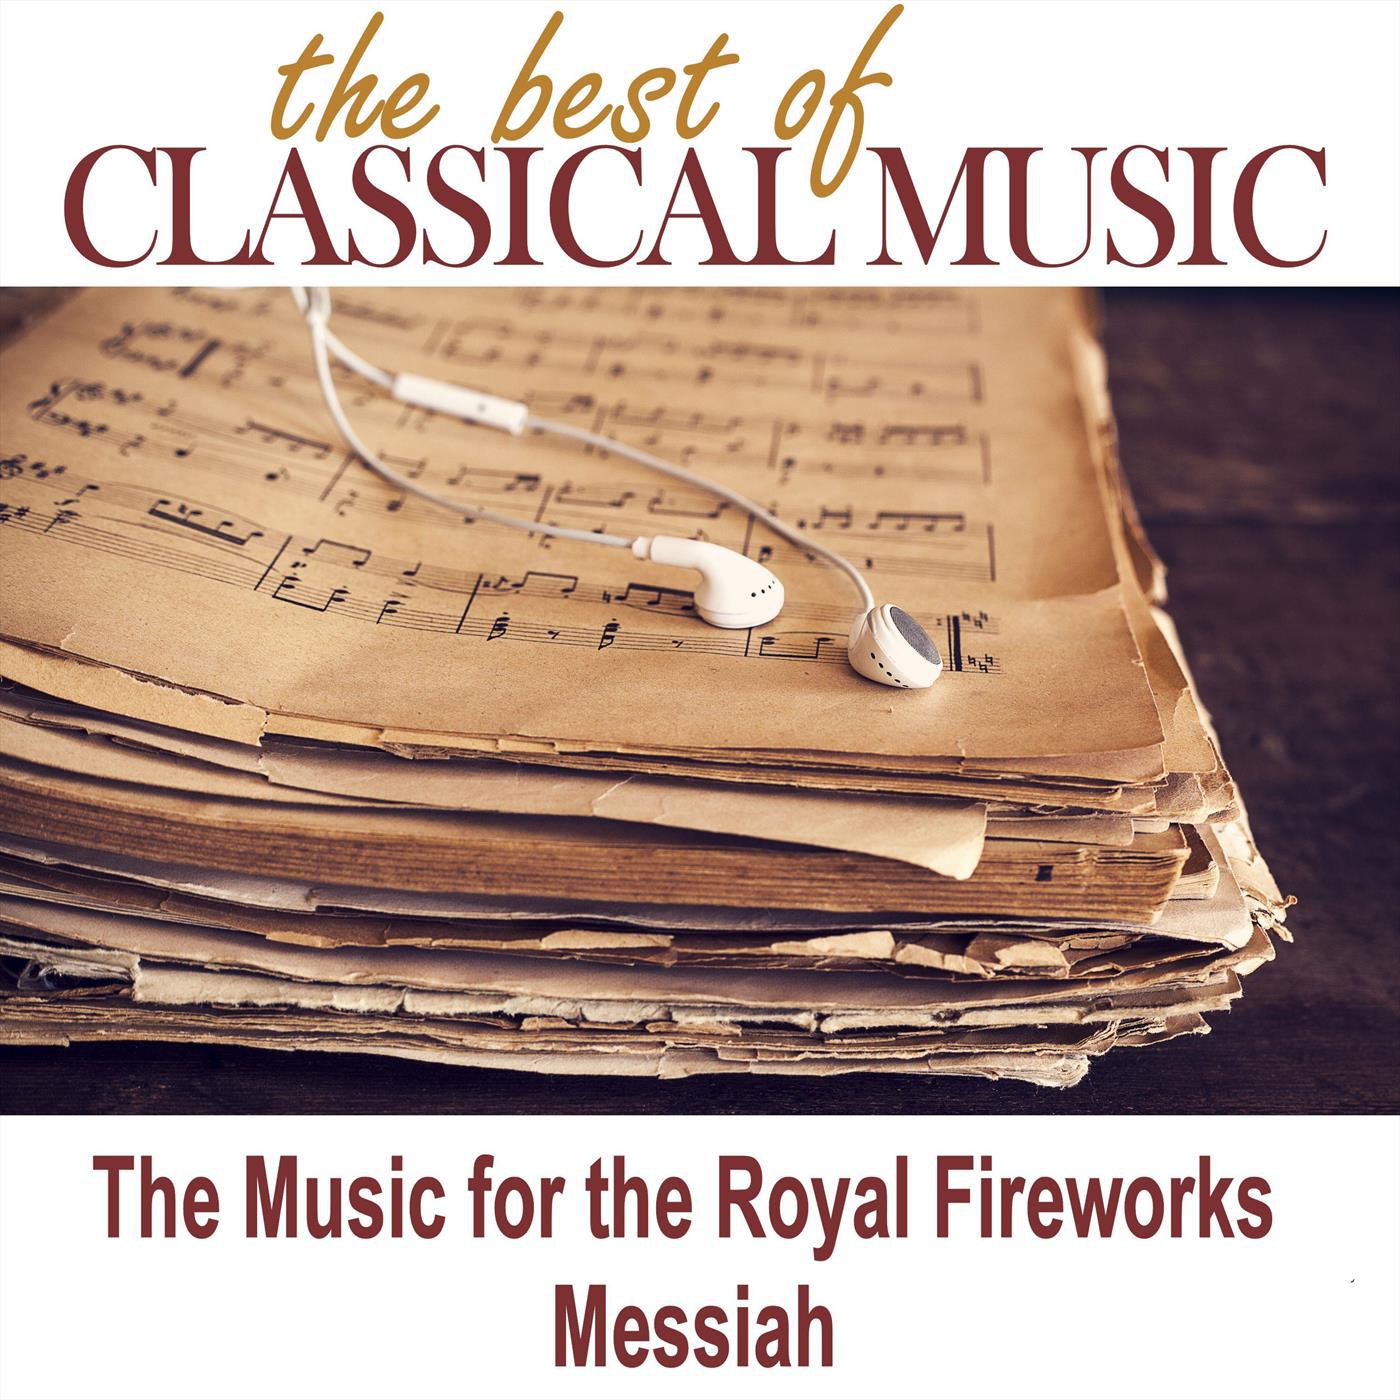 Menuett I  The Music for the Royal Fireworks  Concerto Grosso No. 26 in D major H ndel